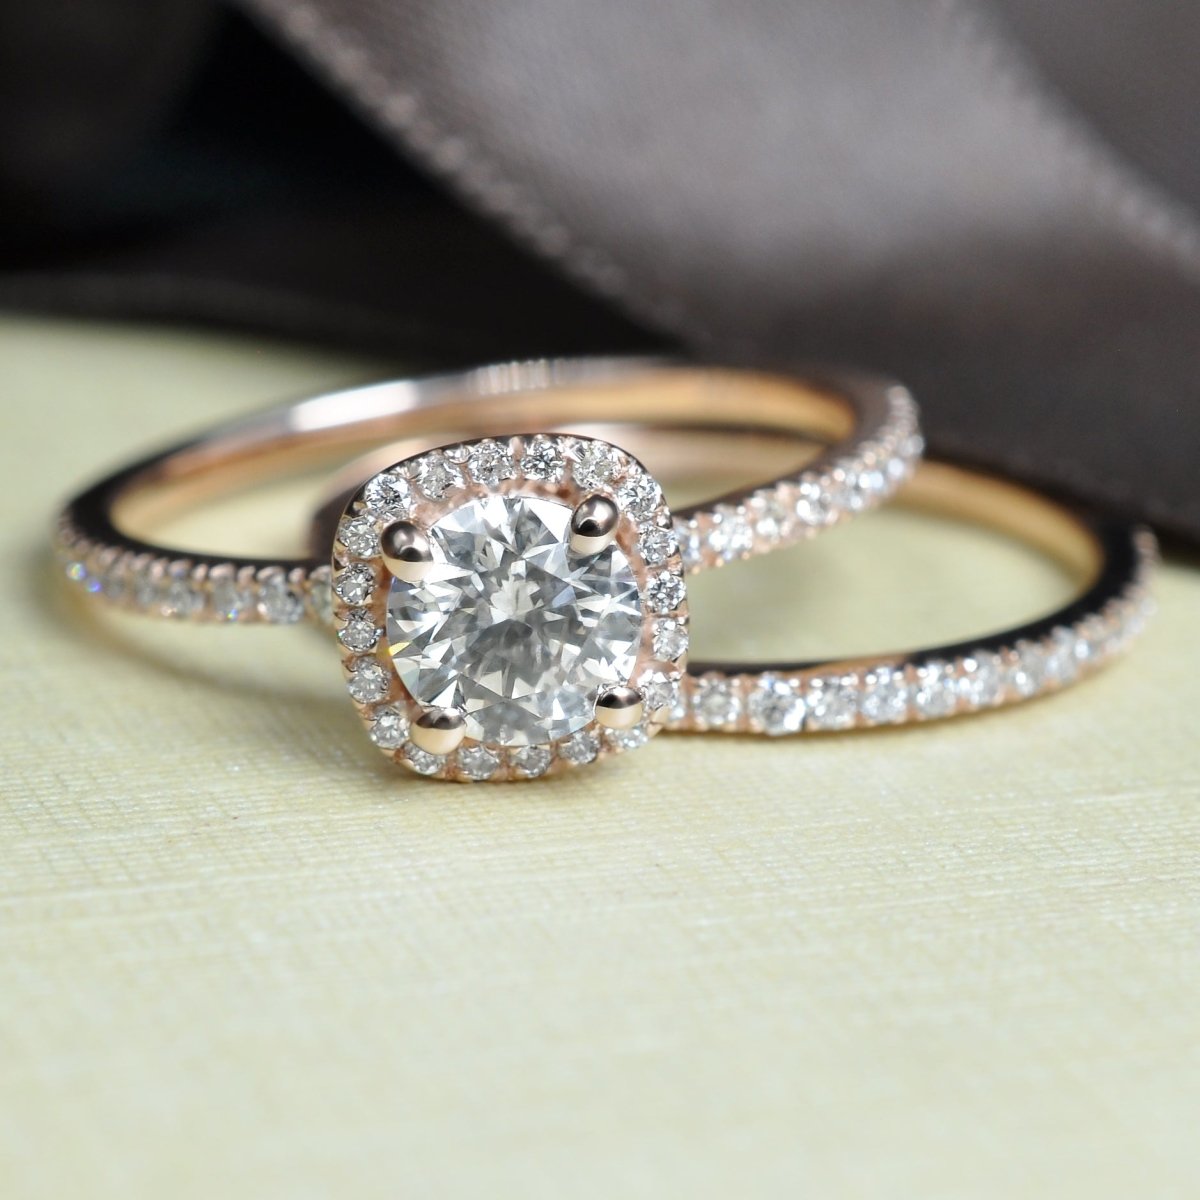 Limited 1.05CT Round Cut Diamond Bridal Set in 14kt Rose Gold - Primestyle.com